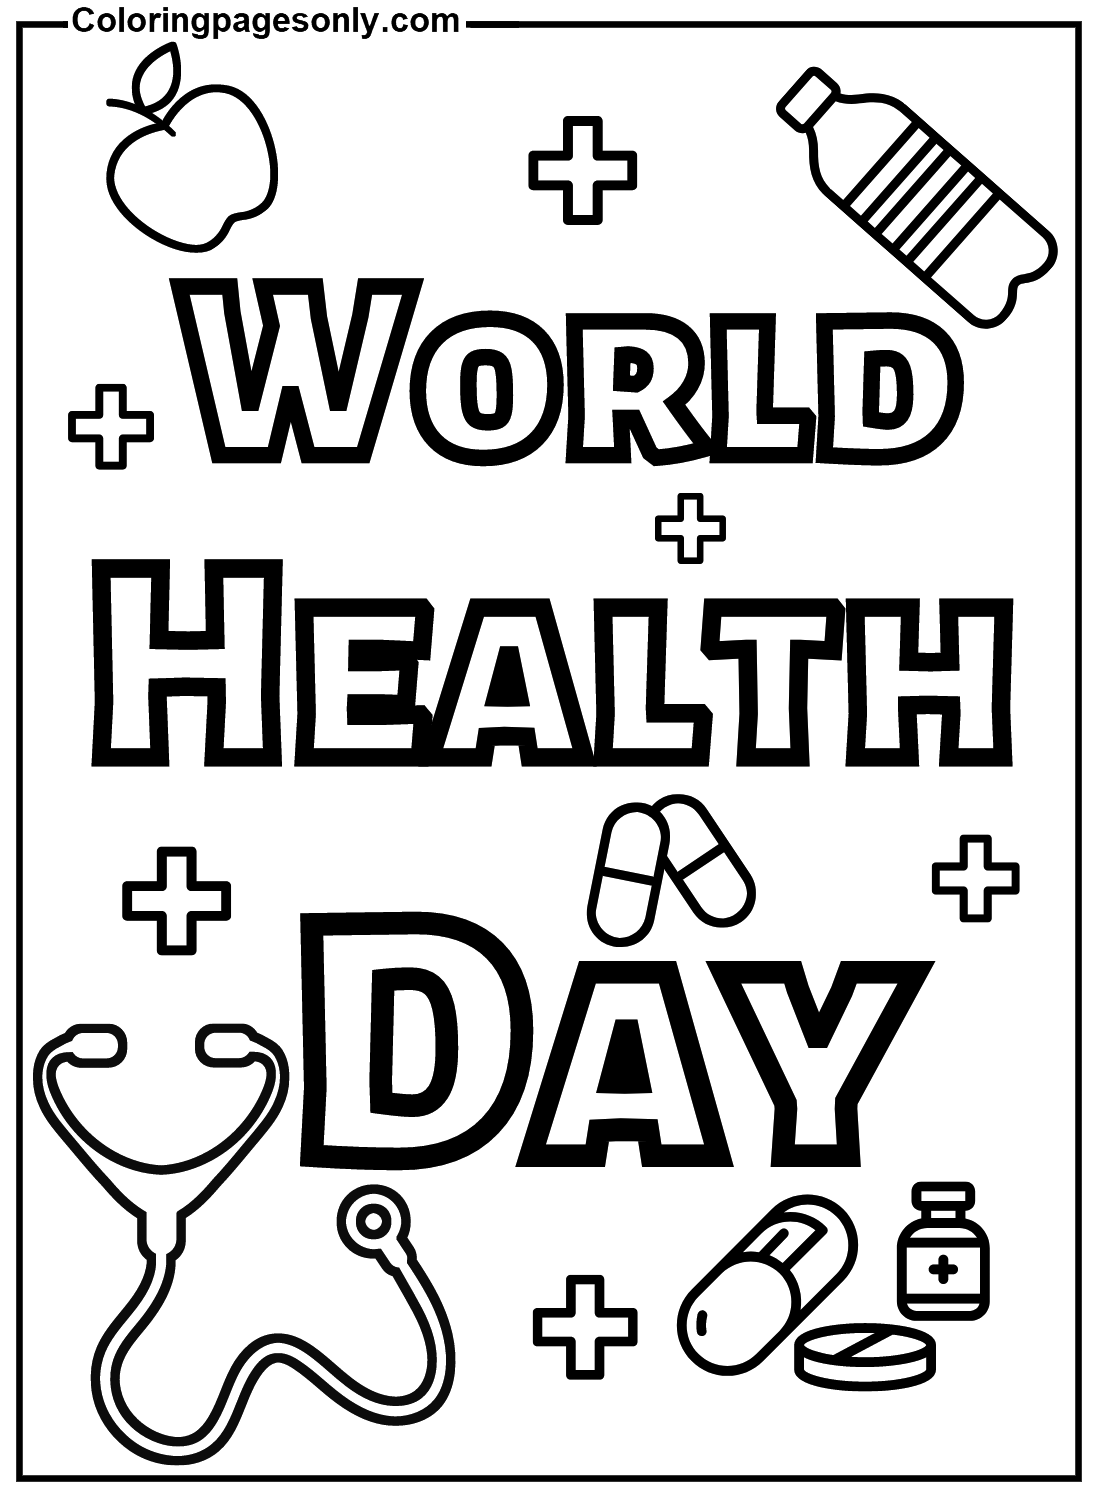 World Health Day Images Coloring Pages